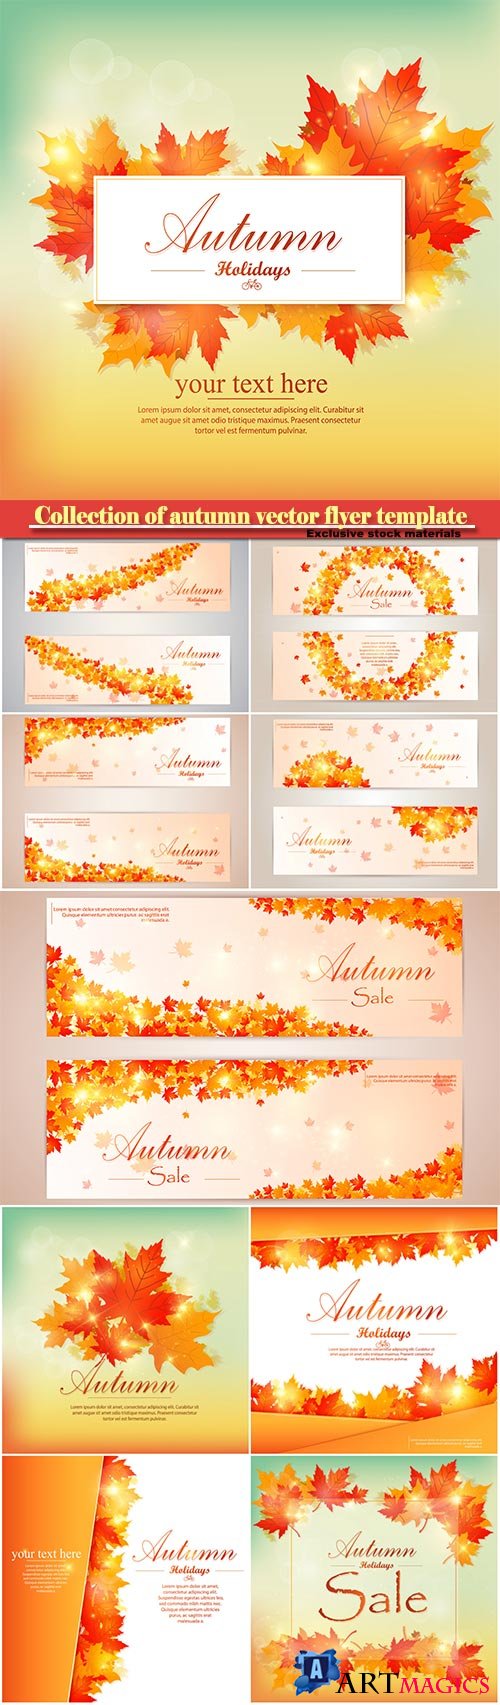 Collection of autumn sale and vector flyer template with lettering, bright fall leaves